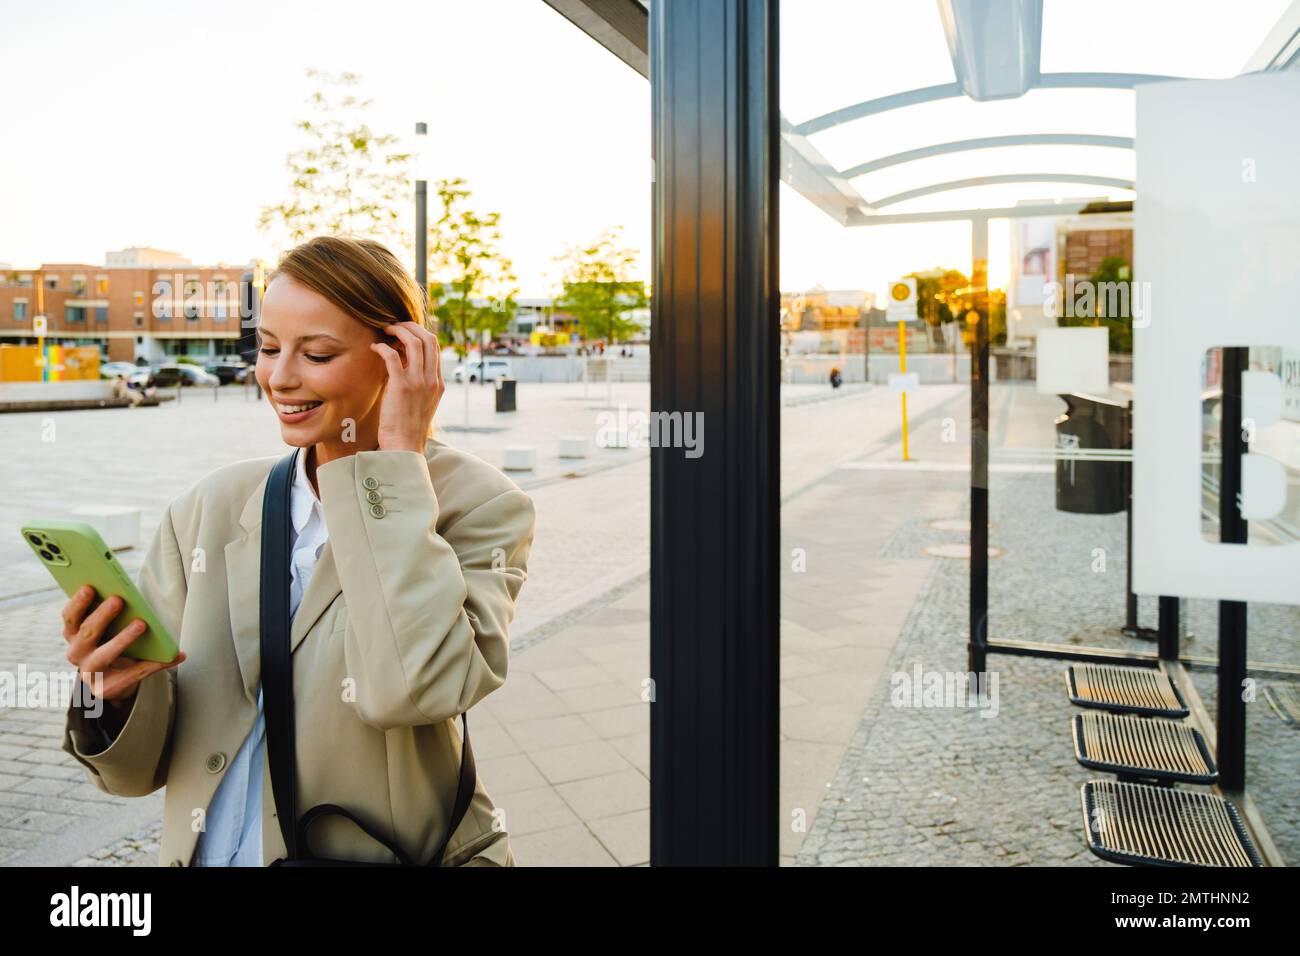 Young white woman smiling and using cellphone while standing at bus station Stock Photo